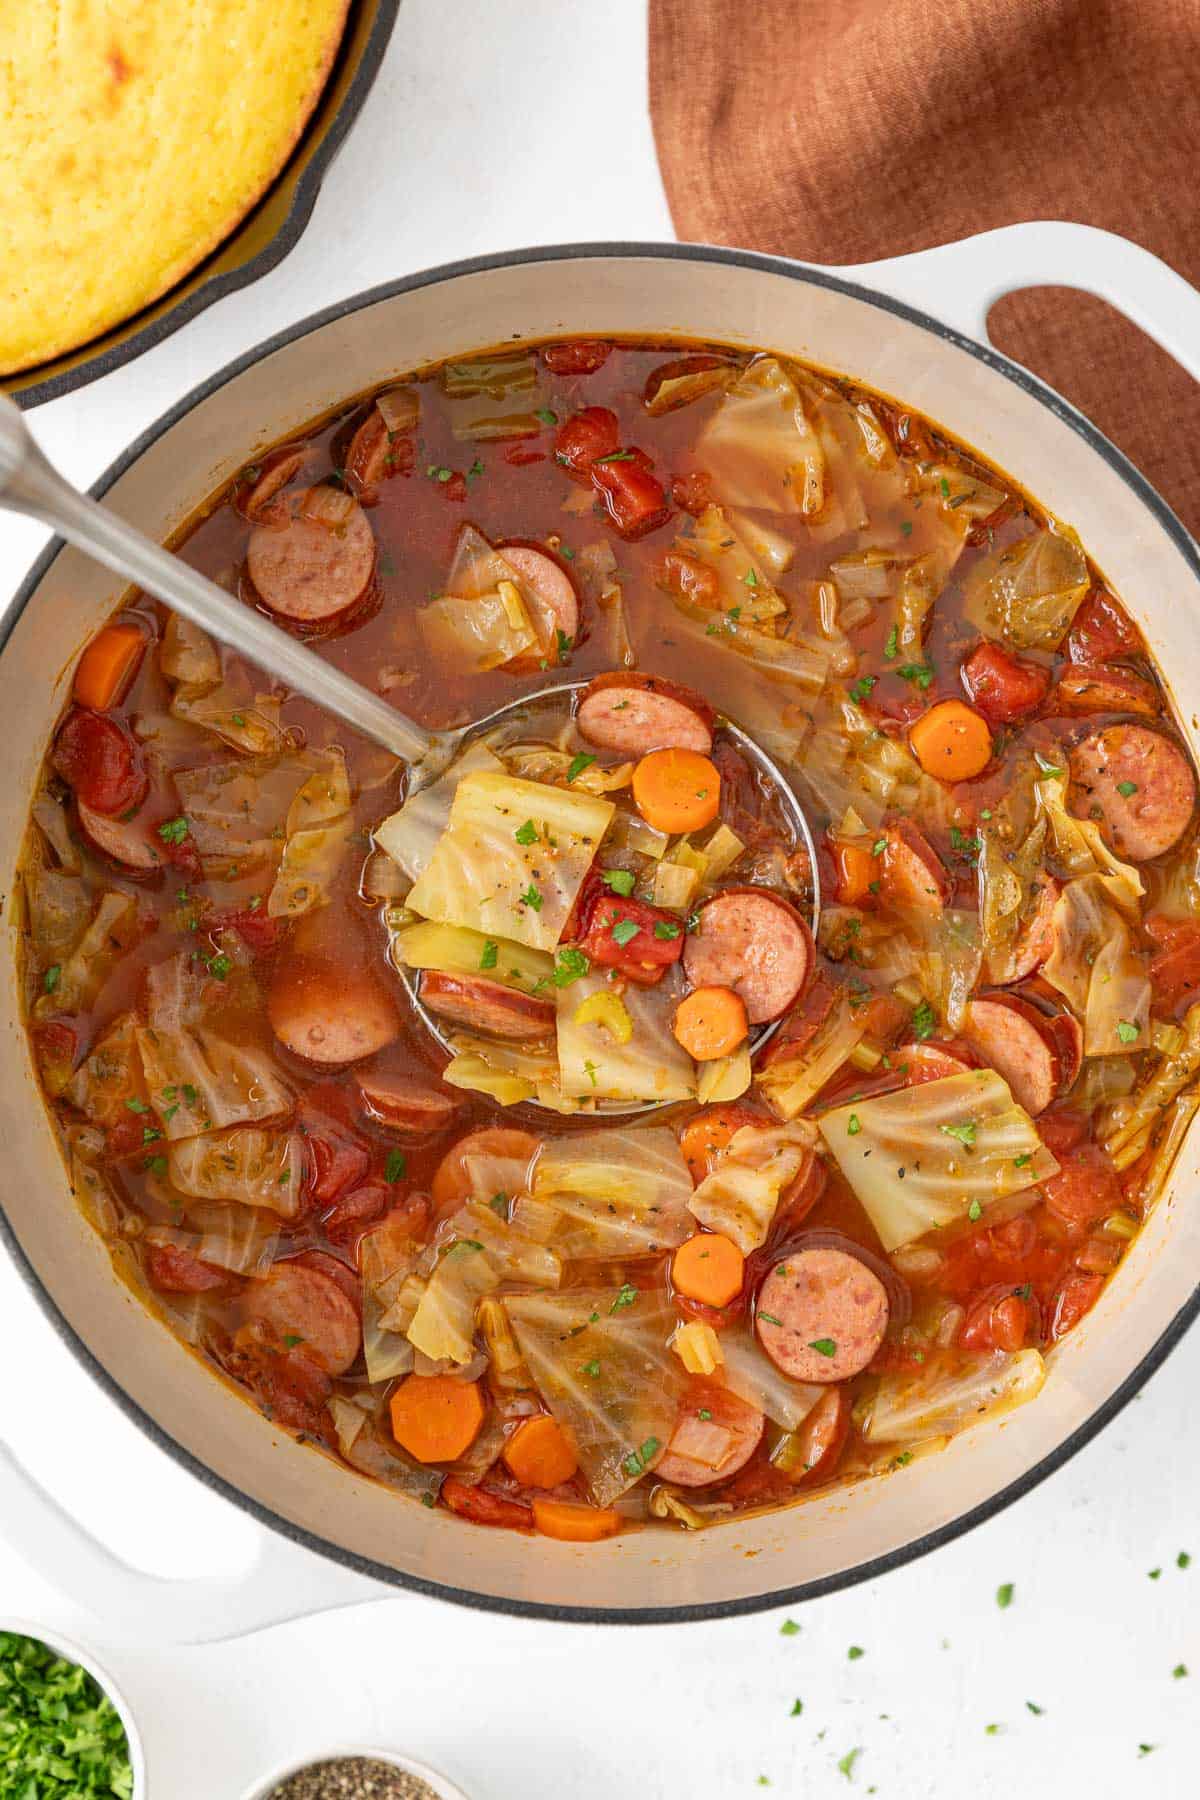 Overhead view of a ladle in a pot of sausage and cabbage soup.